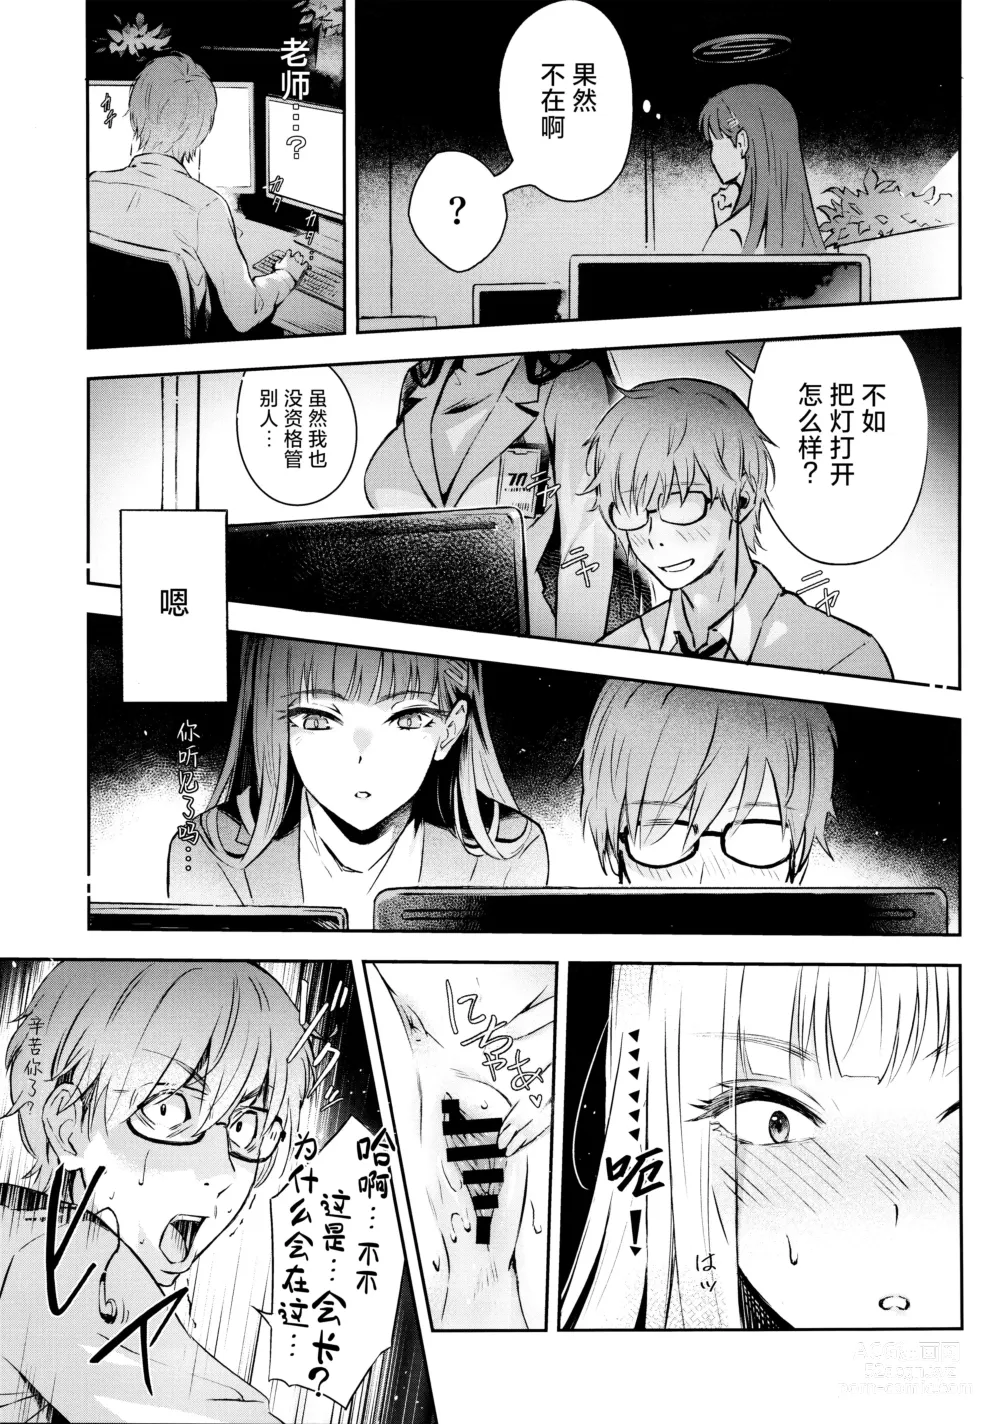 Page 6 of doujinshi 会长亲之恋